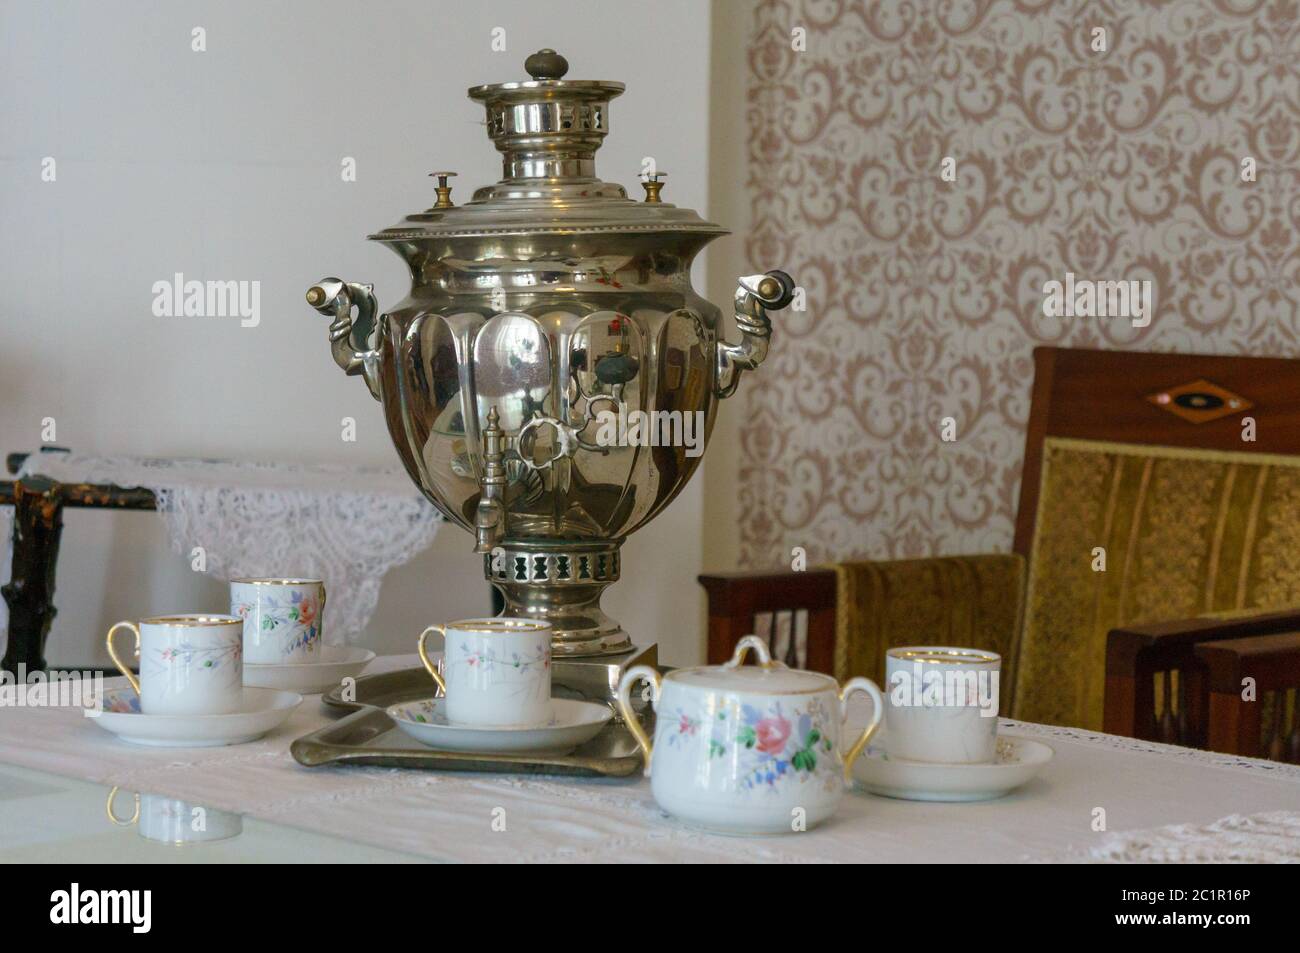 The Vintage Russian Brass Samovar With Porcelain Cups And Teapot